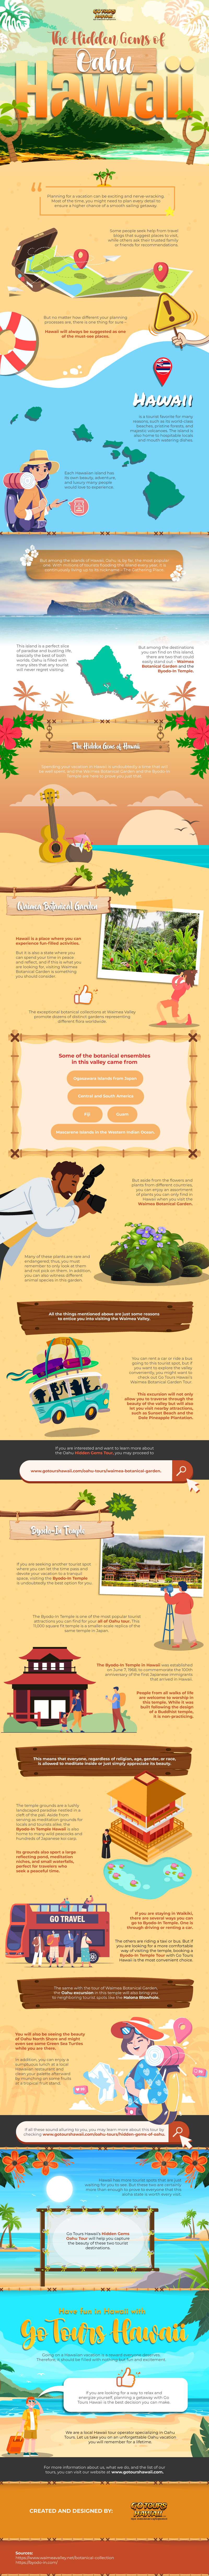 The-Hidden-Gems-of-Oahu-Hawaii-Infographic-Image-HFS54